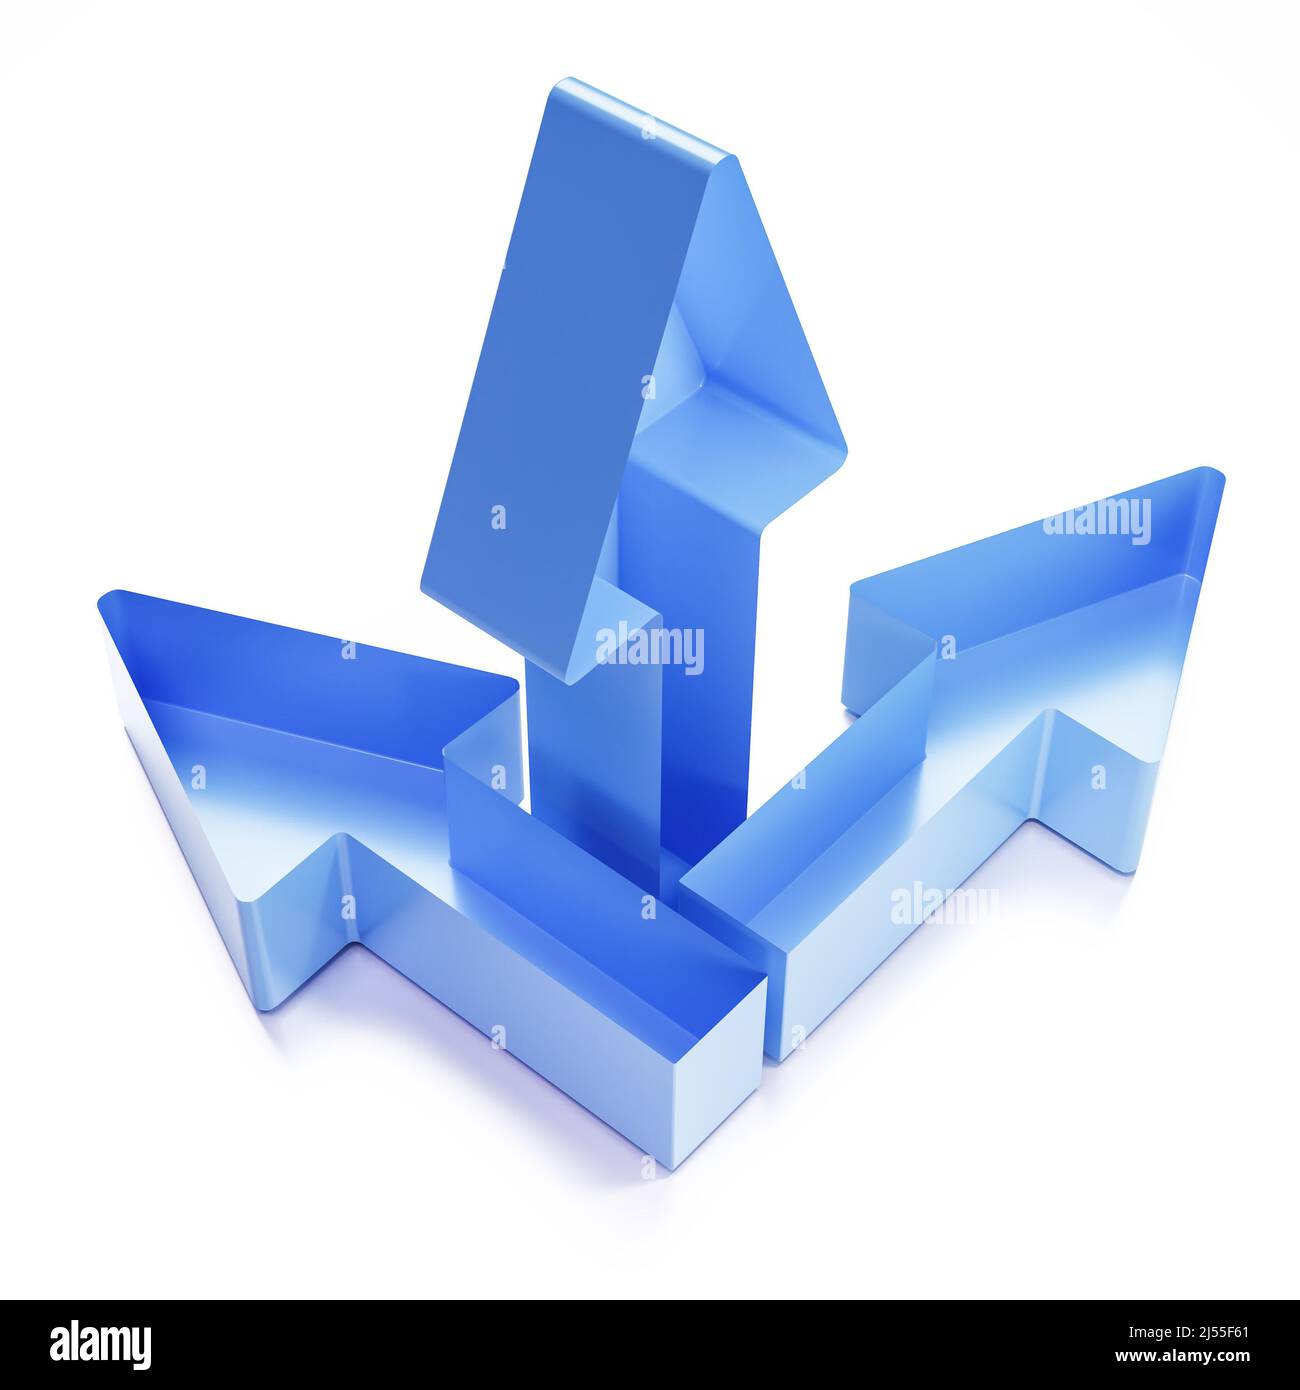 Blue hollow arrows pointing into three different directions. Confusion, direction, irritation concept. Isolated on white Stock Photo